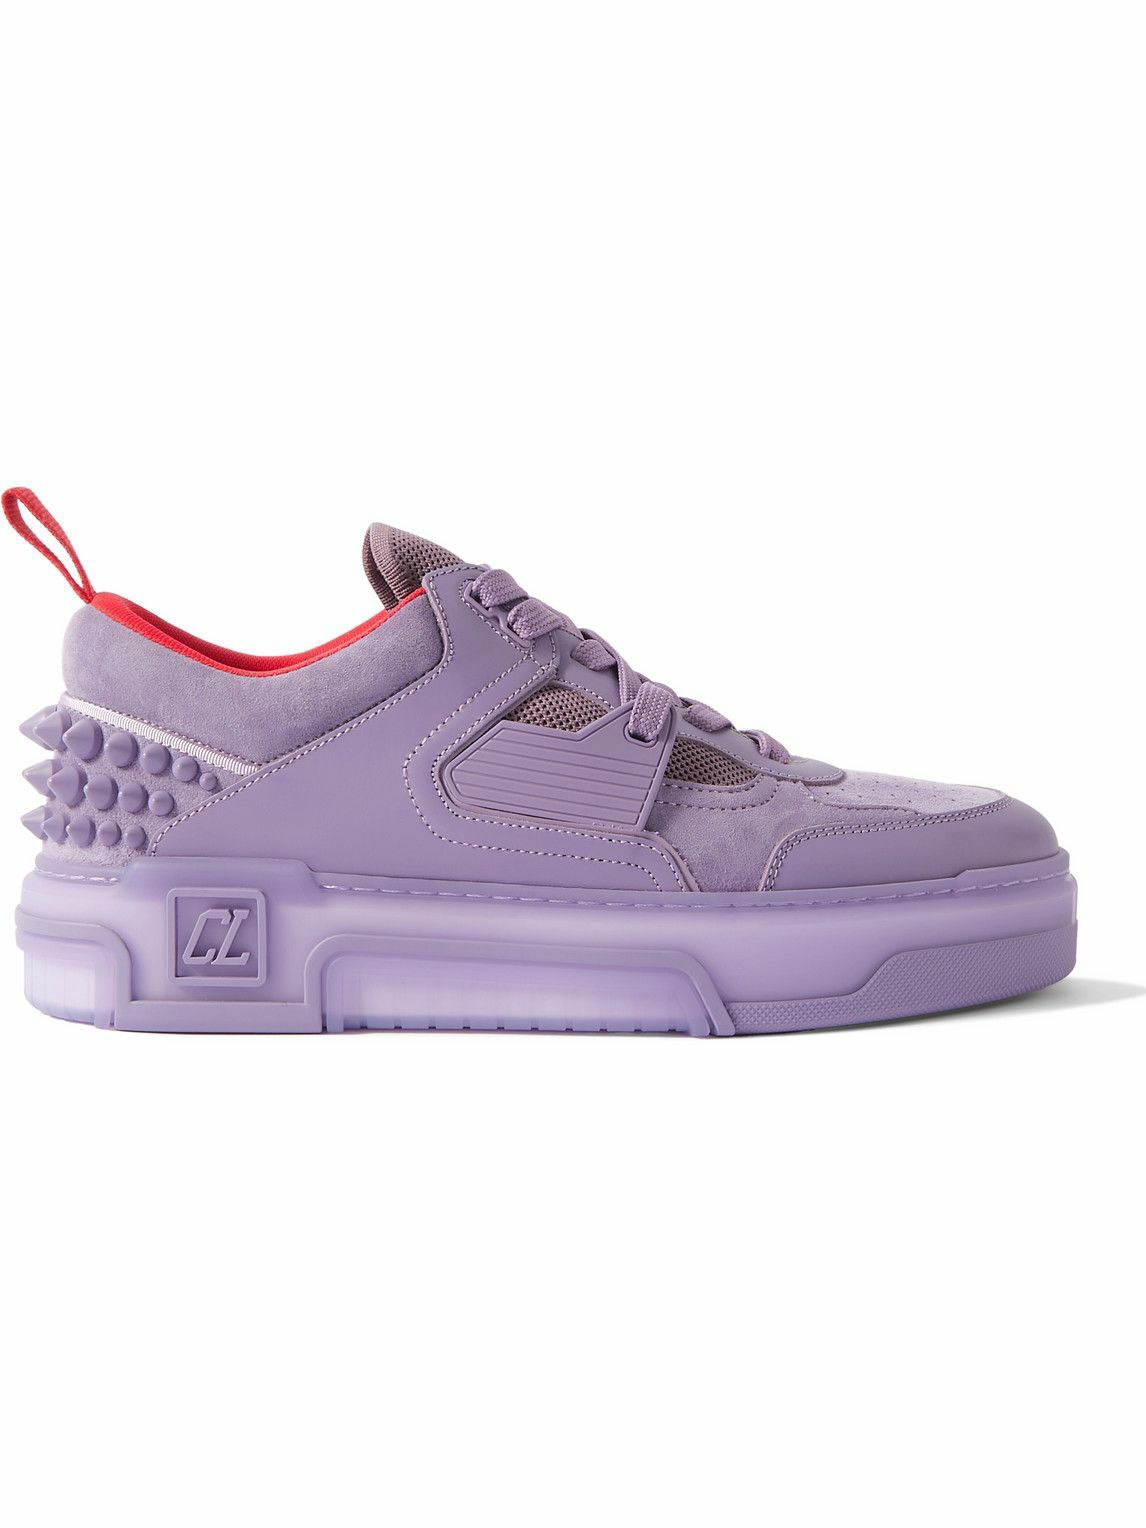 Photo: Christian Louboutin - Astroloubi Spiked Leather, Suede and Mesh Sneakers - Purple